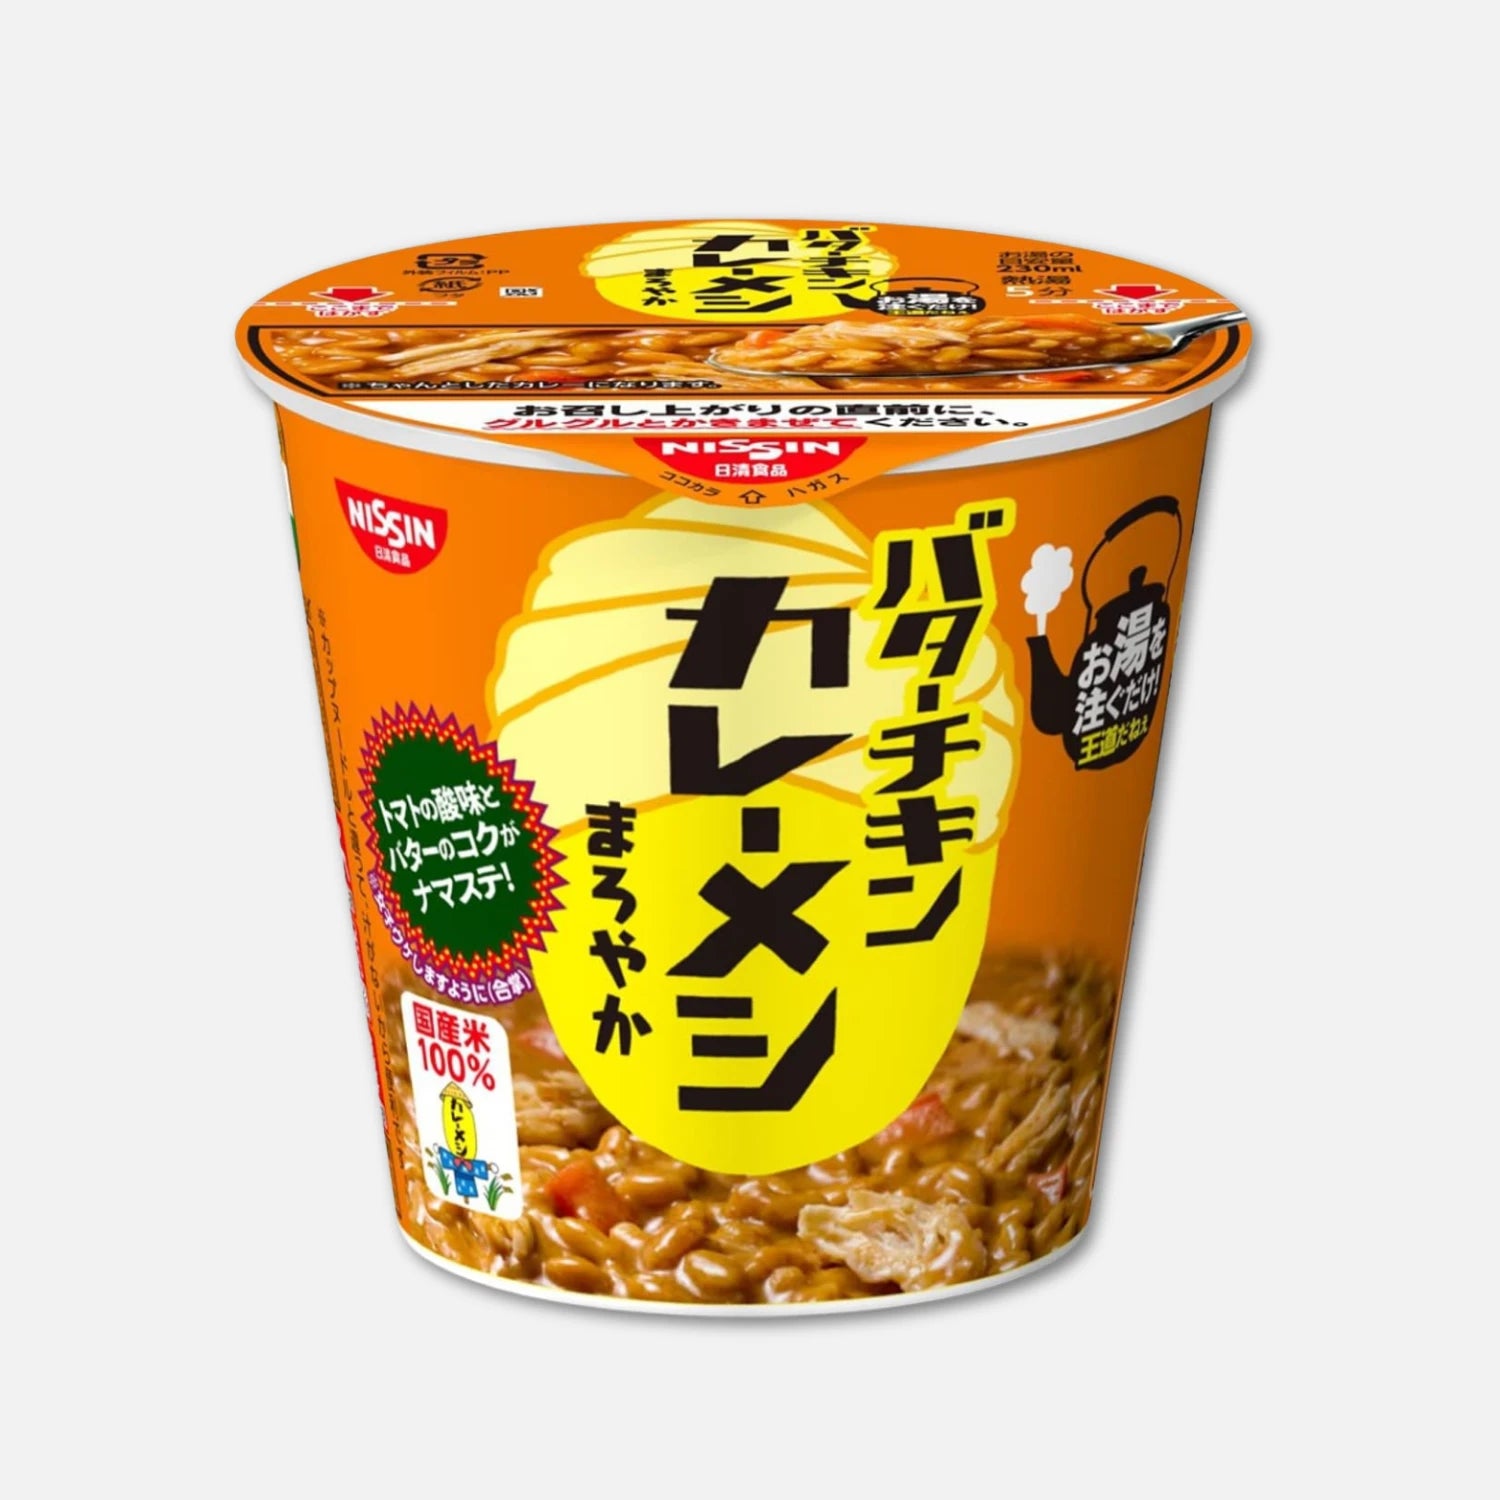 Nissin Foods Butter Chicken Curry Meshi 100g